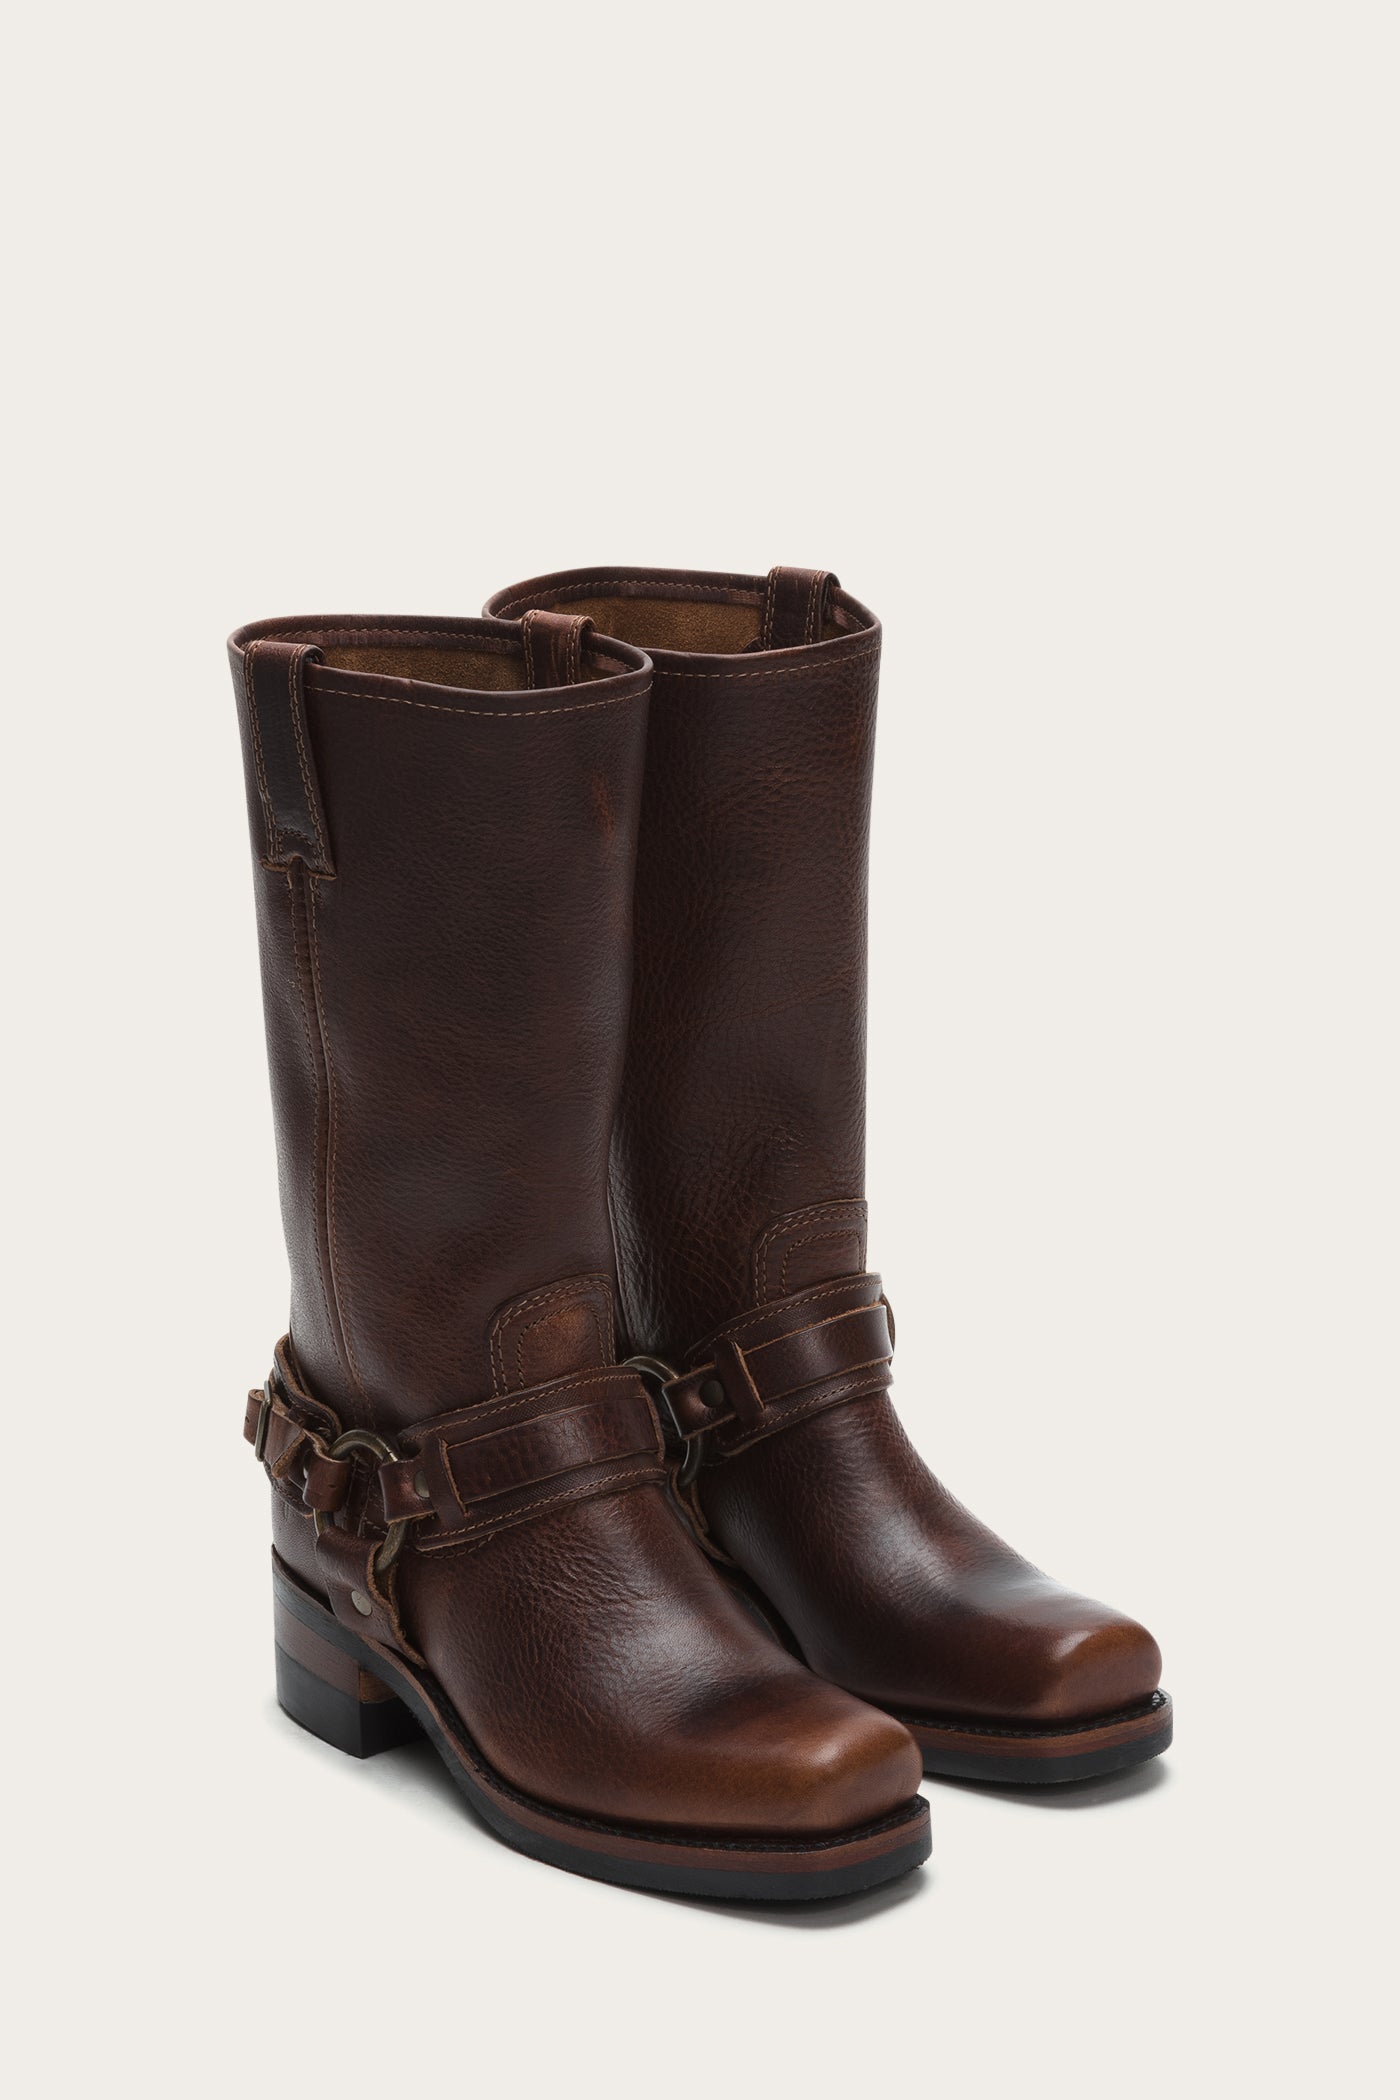 frye belted harness boots womens